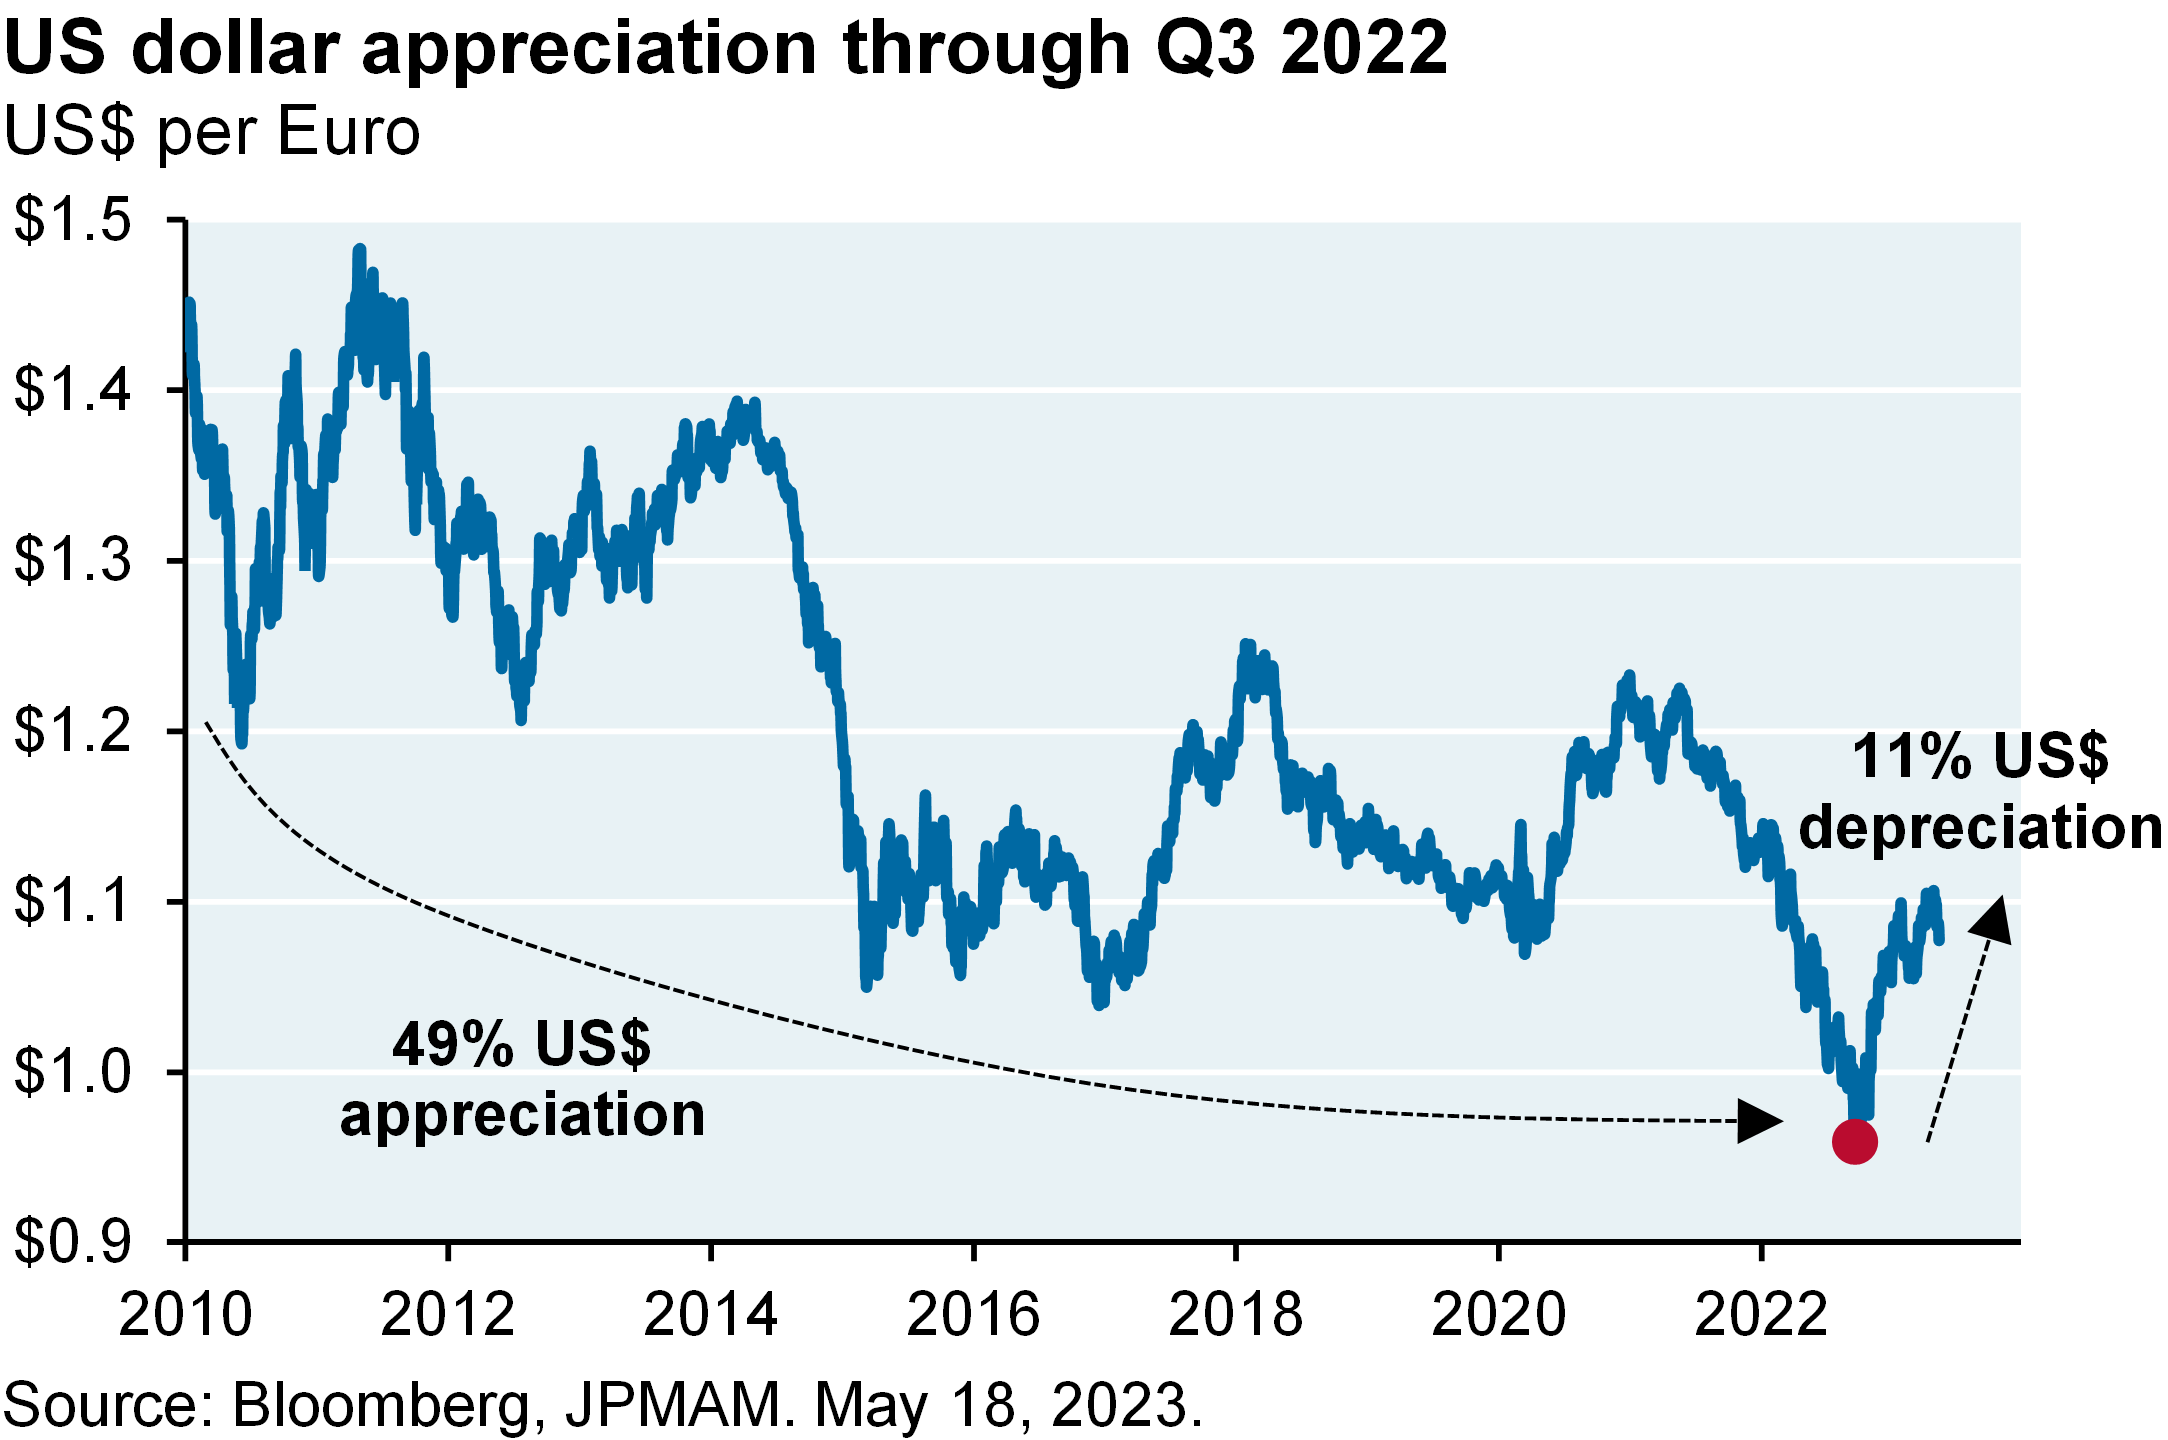 Line chart shows the price of 1 Euro in US$ since 2010. The chart shows that from Jan 2010 to Sept 2022, the US$ appreciated by ~50%. Since then, the US$ has depreciated by ~11%.